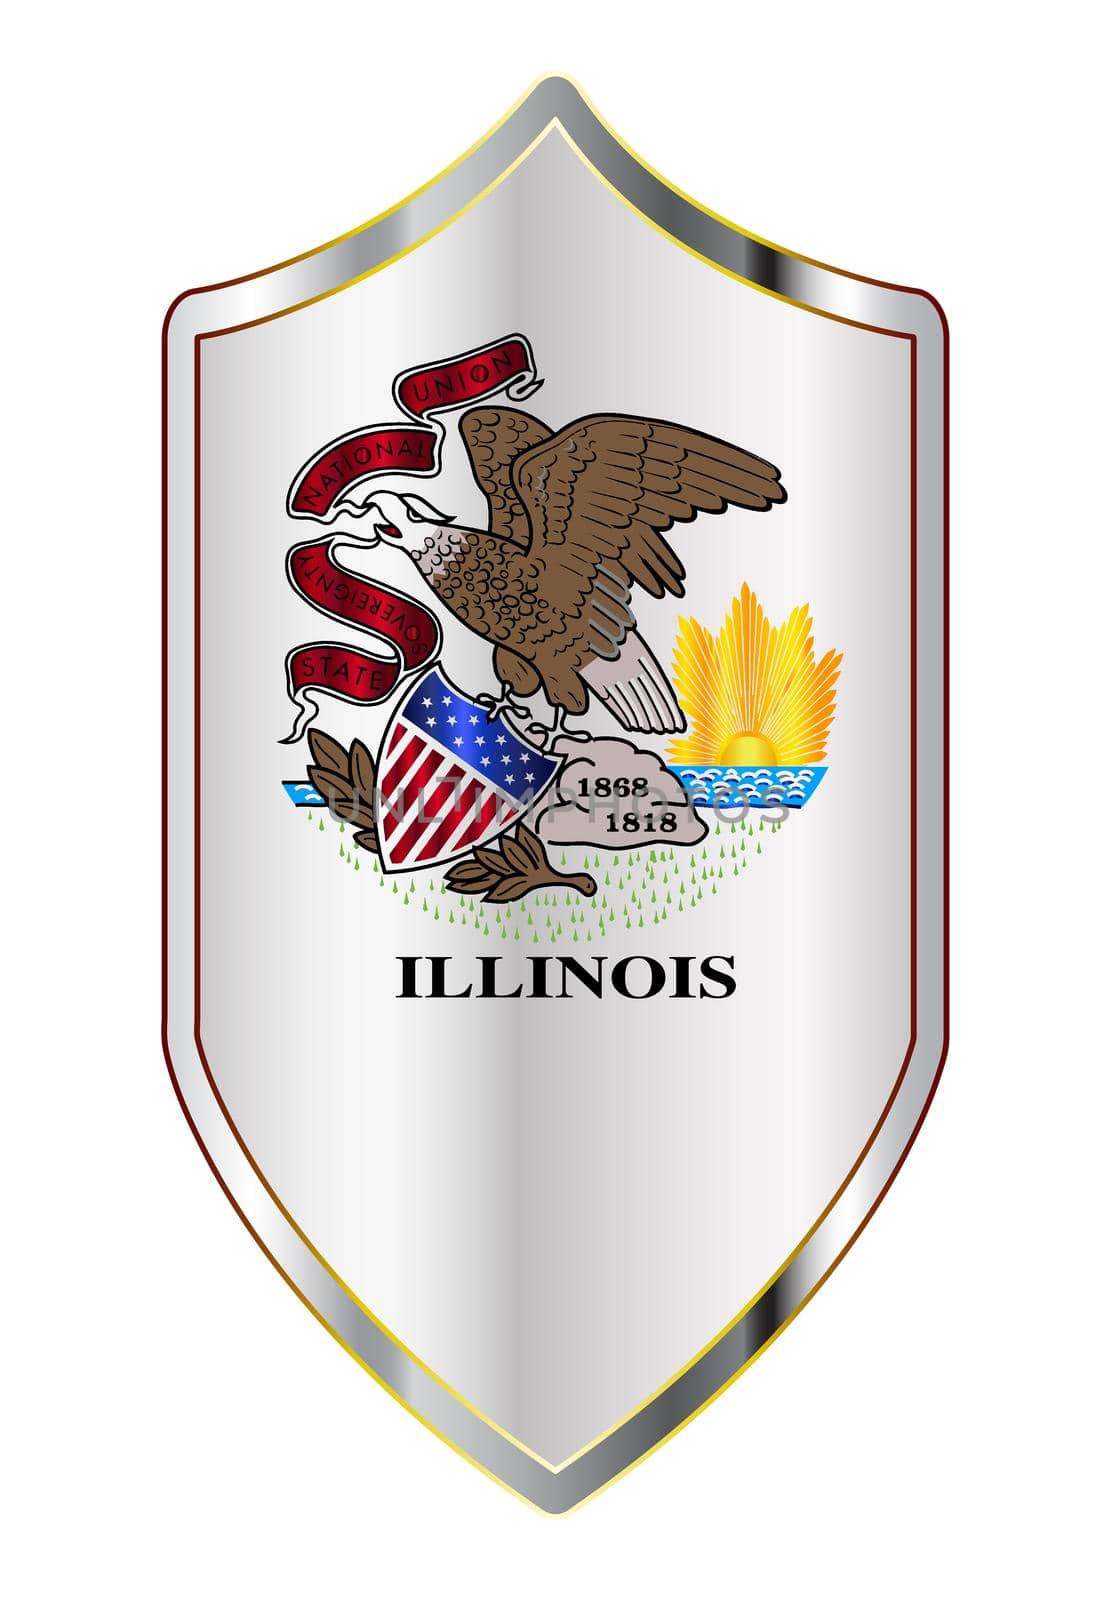 A typical crusader type shield with the state flag of Illinois all isolated on a white background